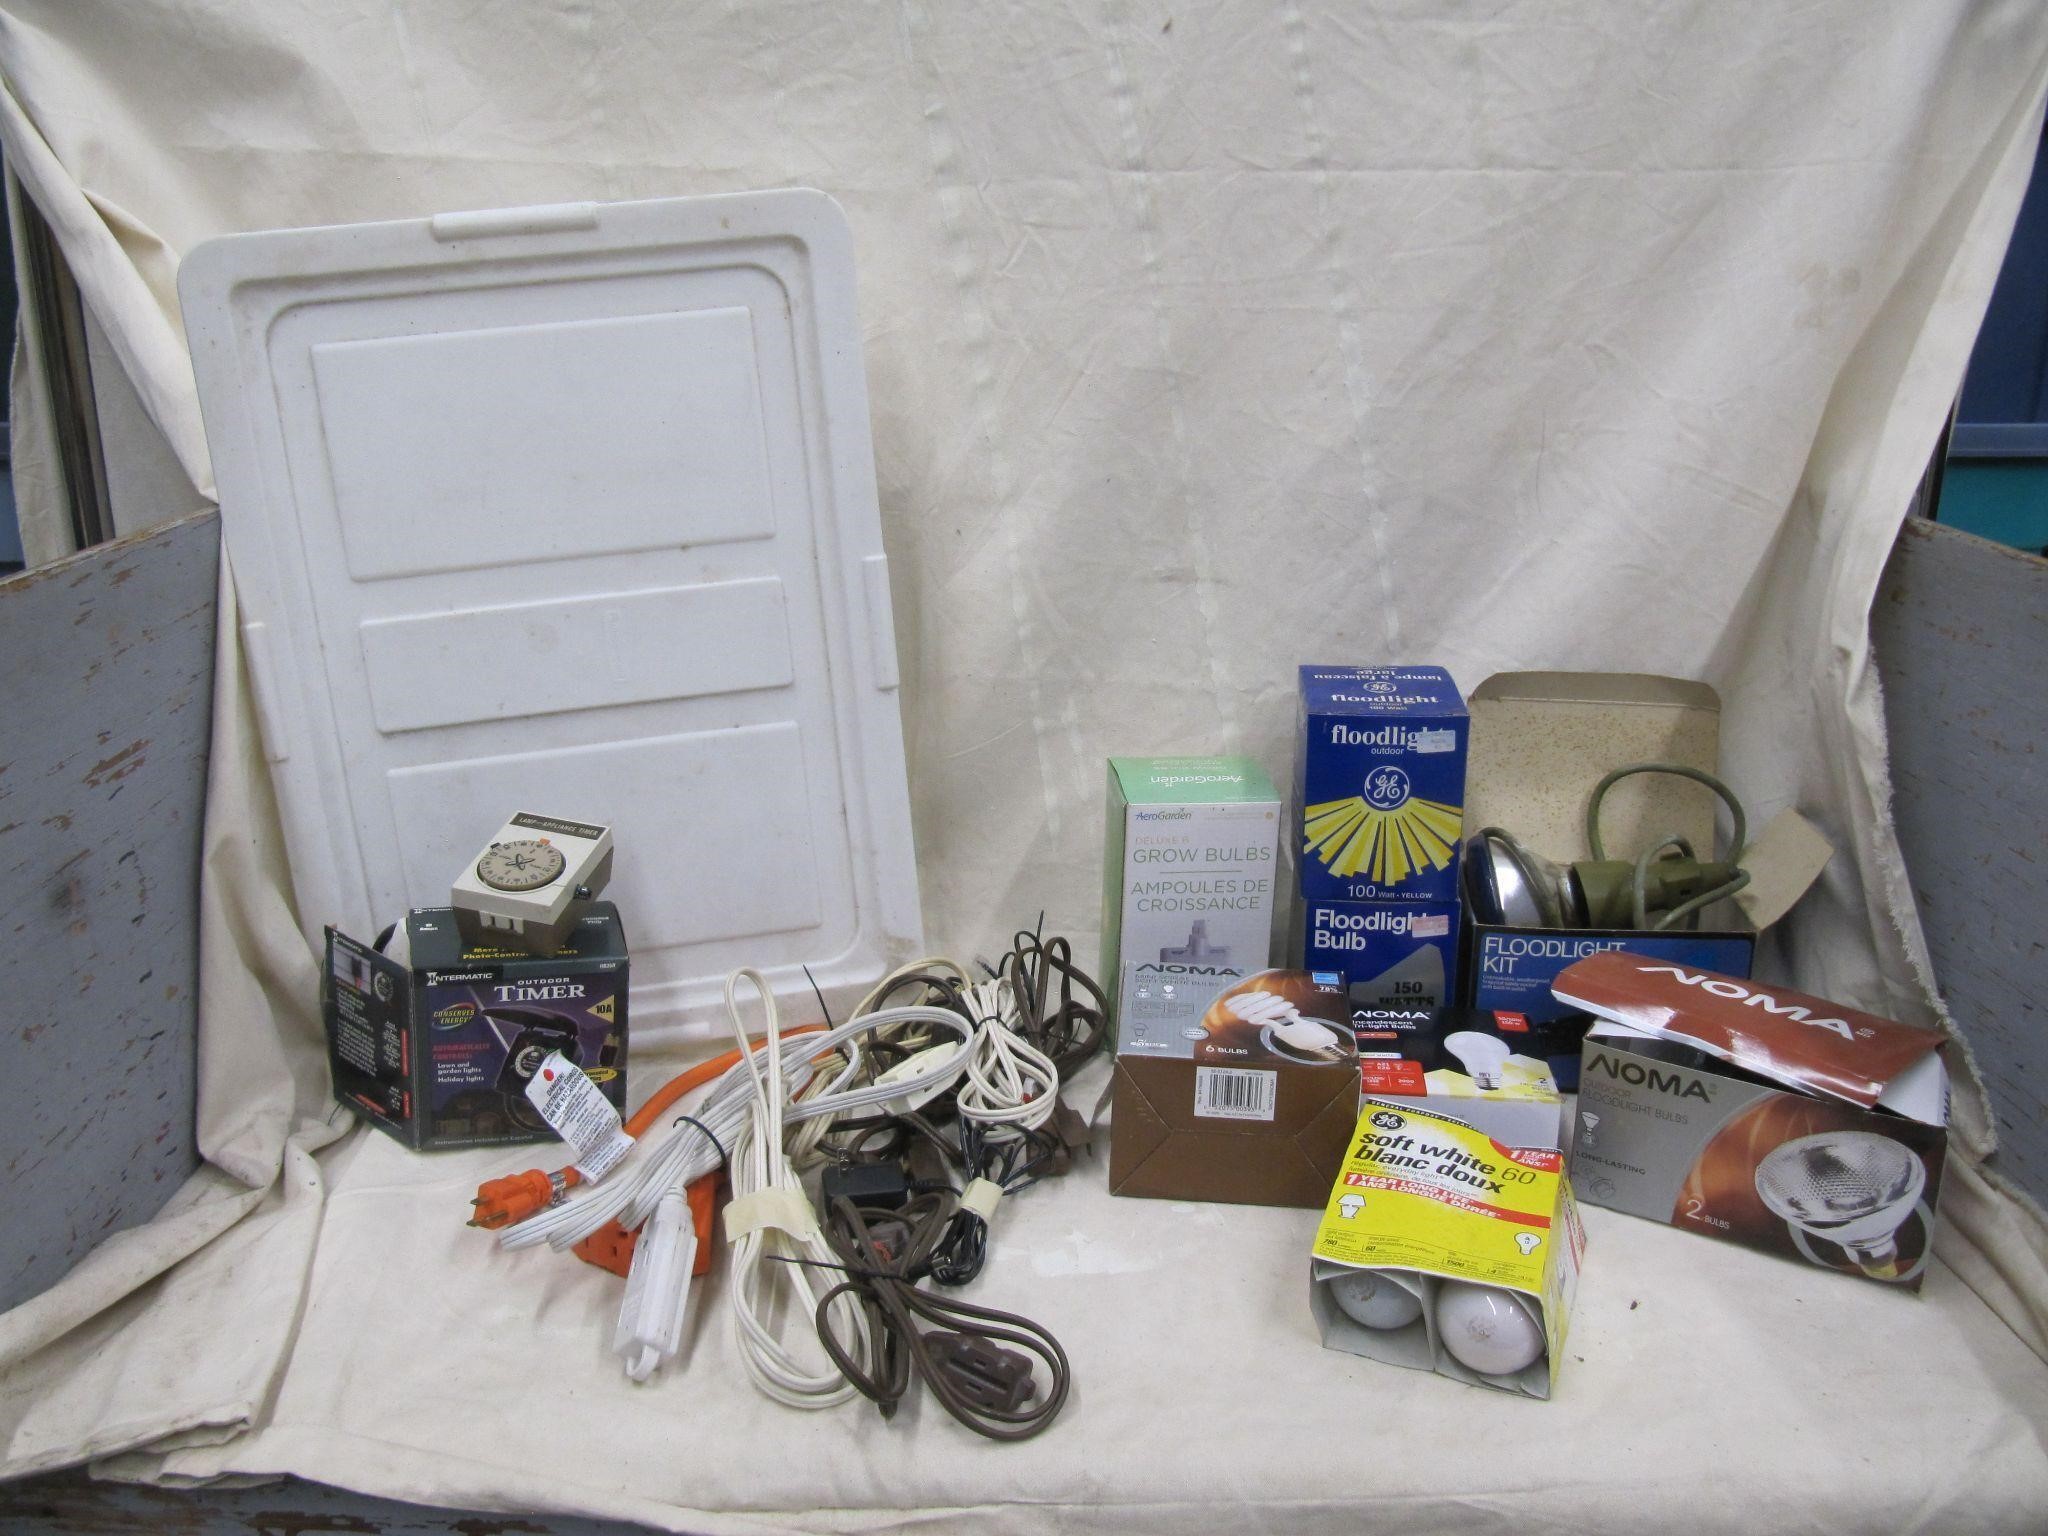 EXTENSIONS,TIMERS, BULBS, IN FLAT TOTE